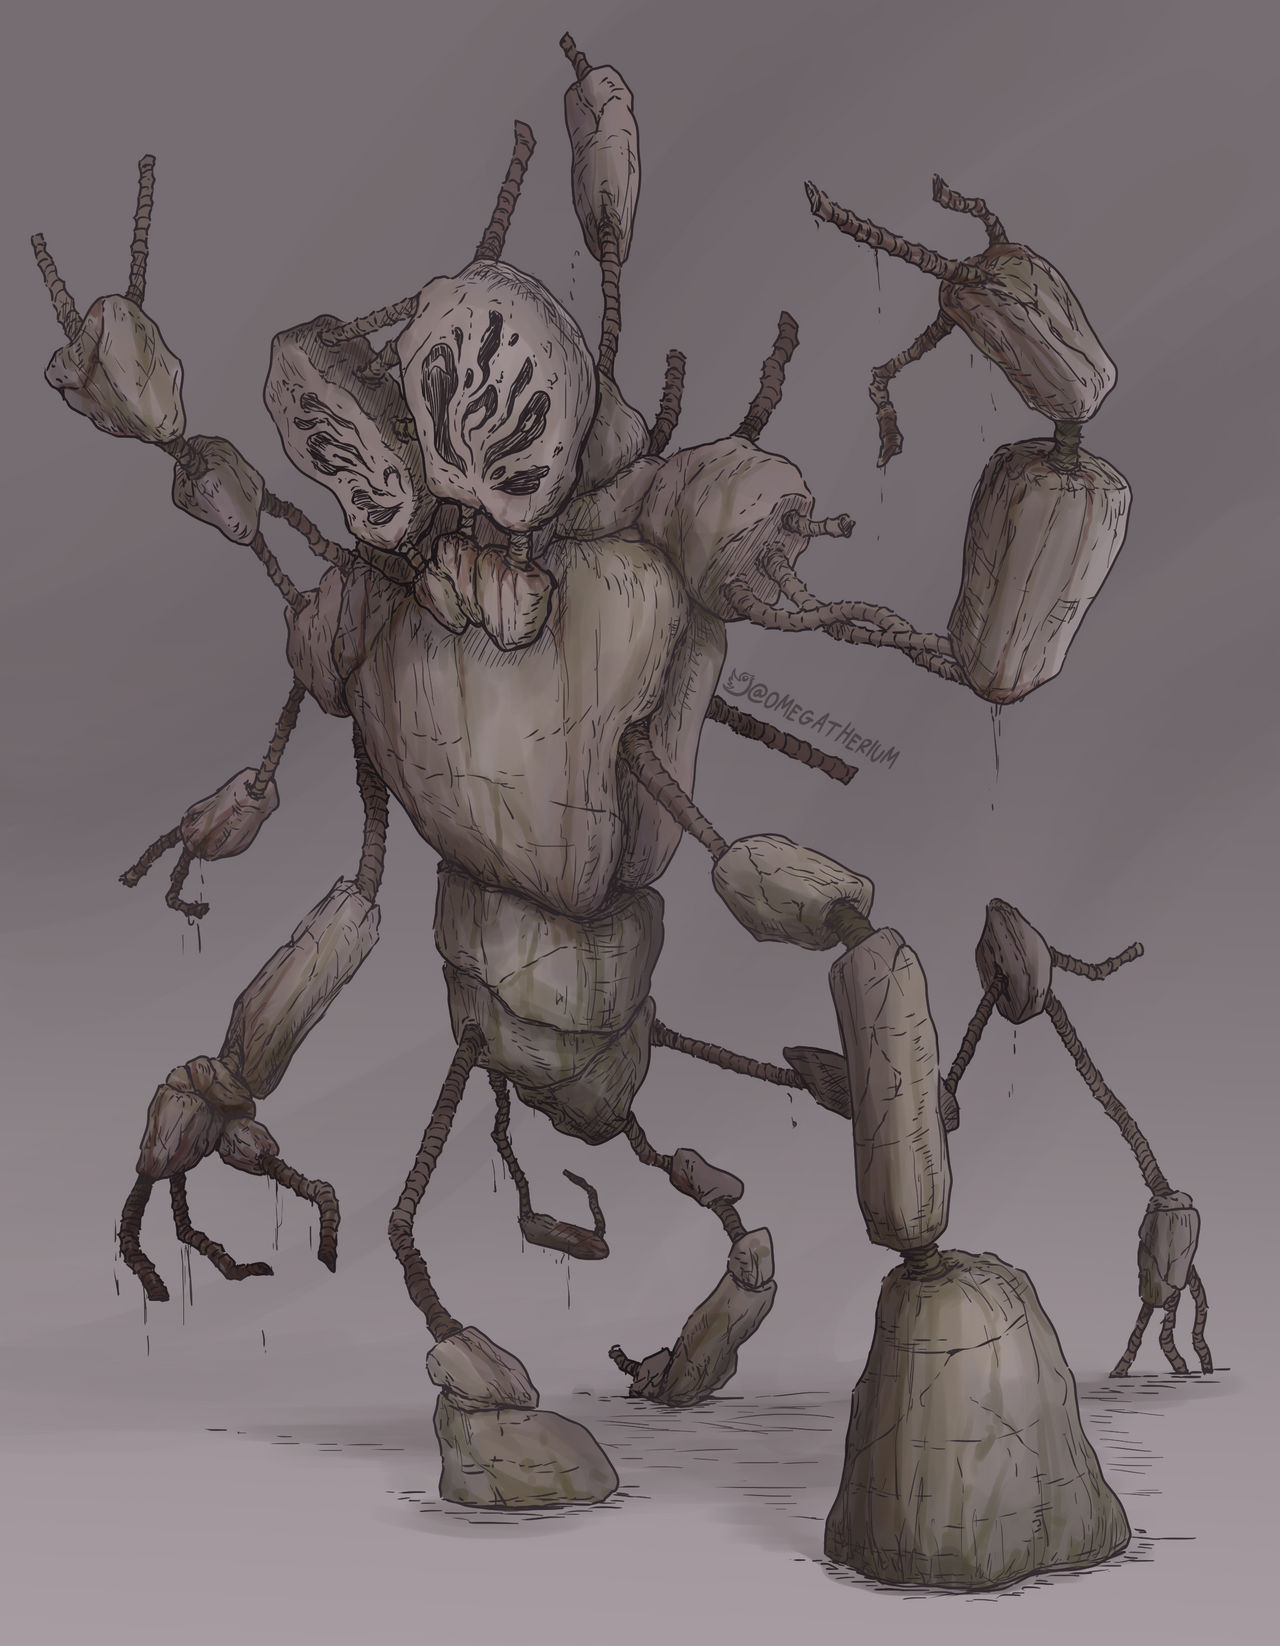 SCP-173 (redesigned) by Glury on DeviantArt